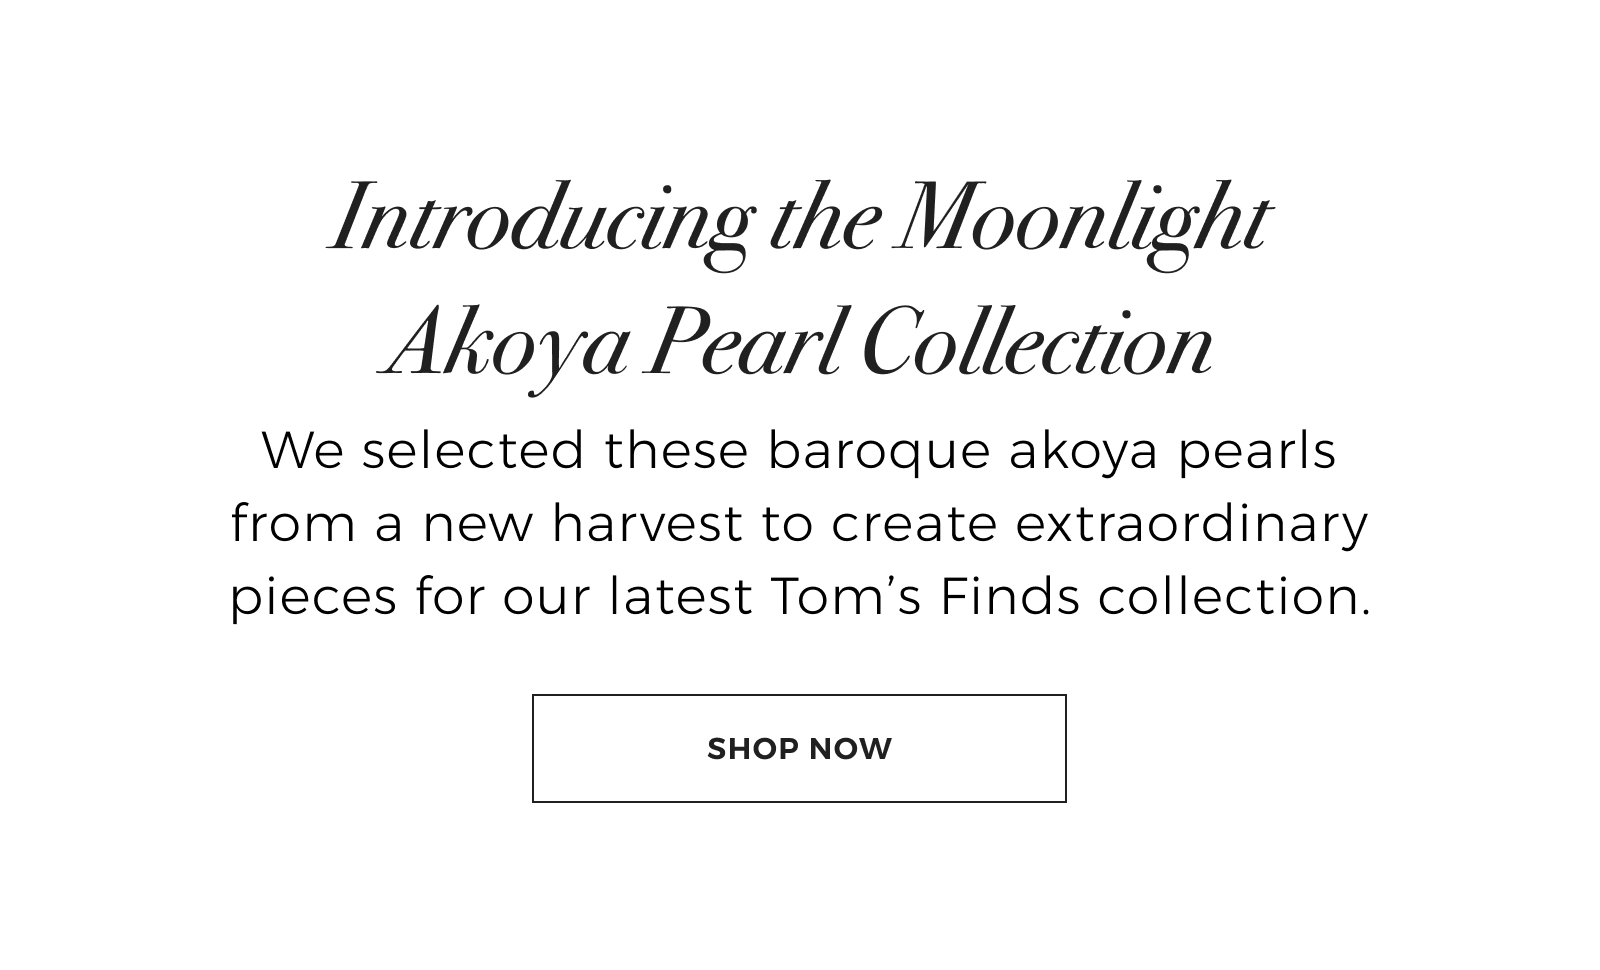 Limited Edition: Introducing the Moonlight Akoya Pearl Collection - We selected these baroque akoya pearls from a new harvest to create extraordinary pieces for our latest Toms Finds collection. Shop Now >